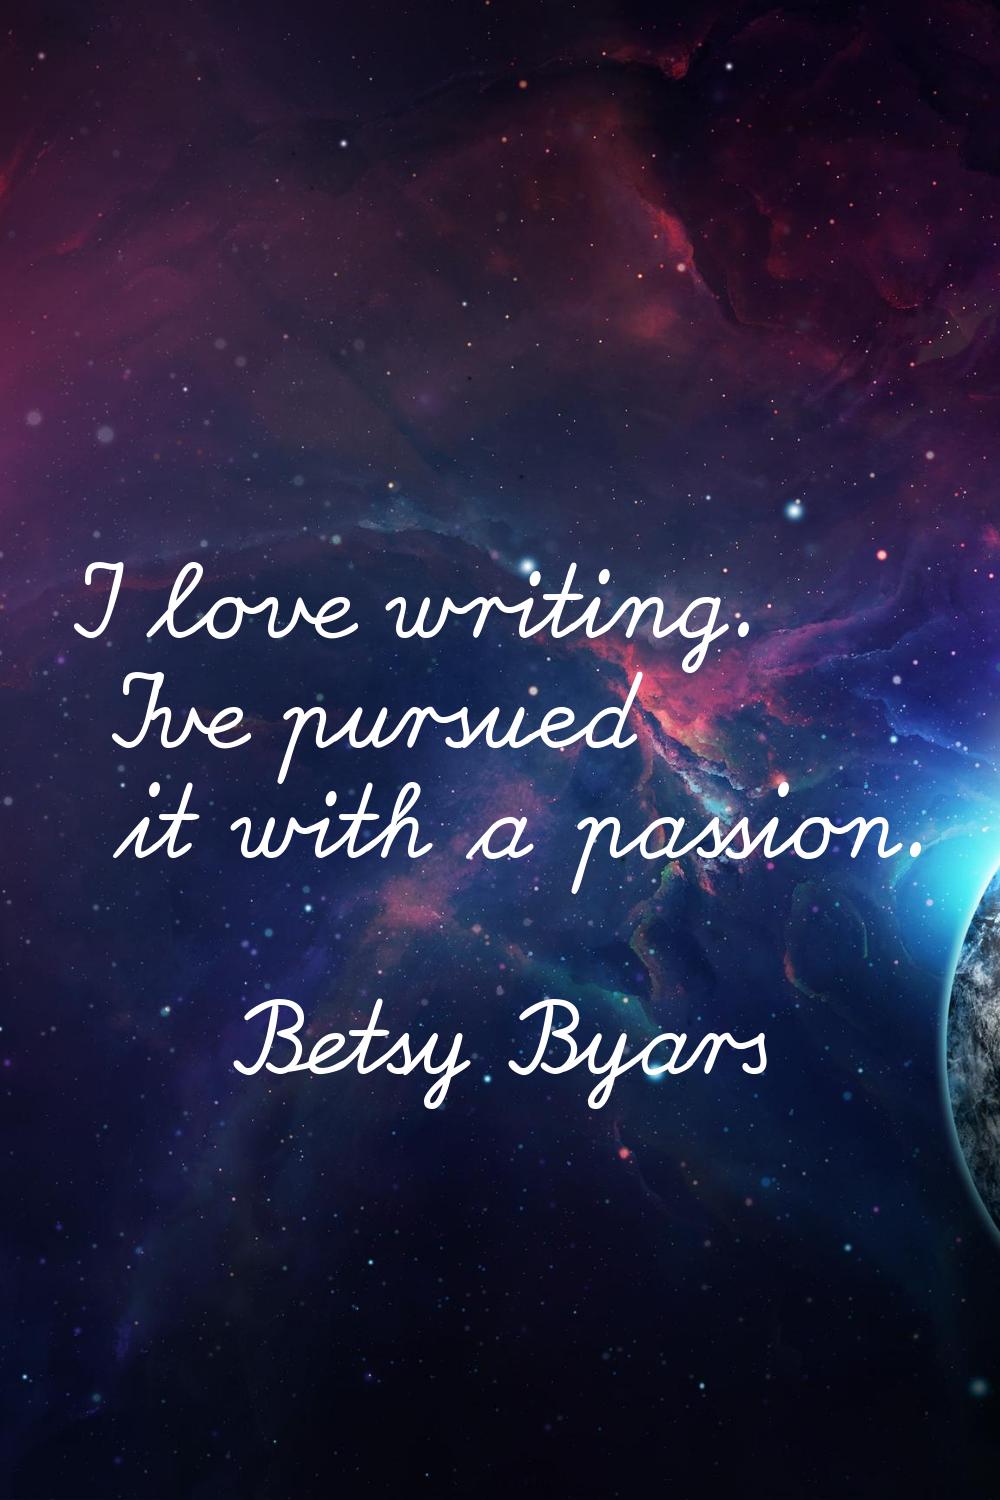 I love writing. I've pursued it with a passion.